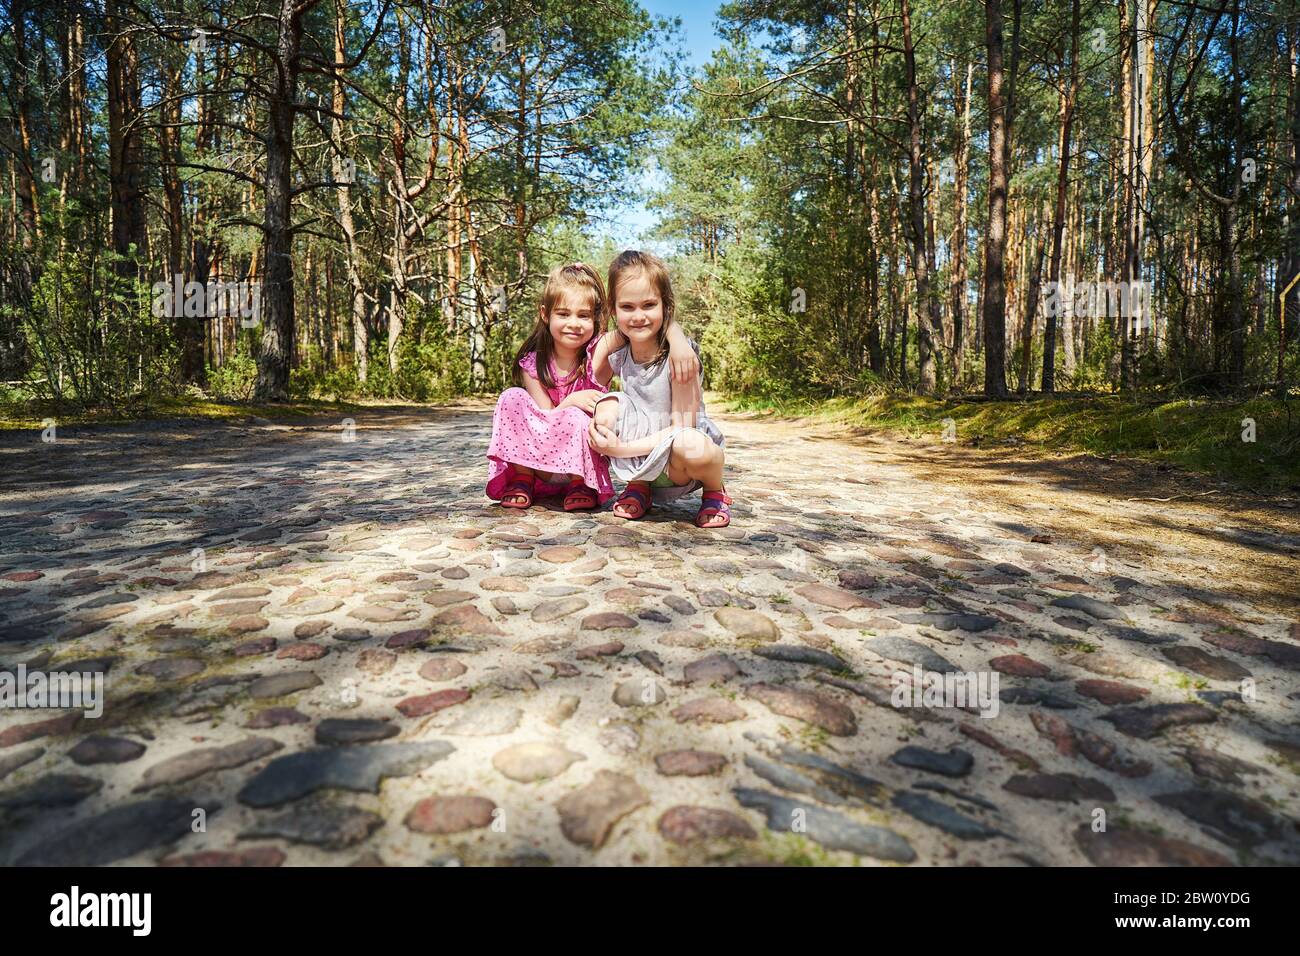 two beautiful little girls on the road in a pine forest Stock Photo